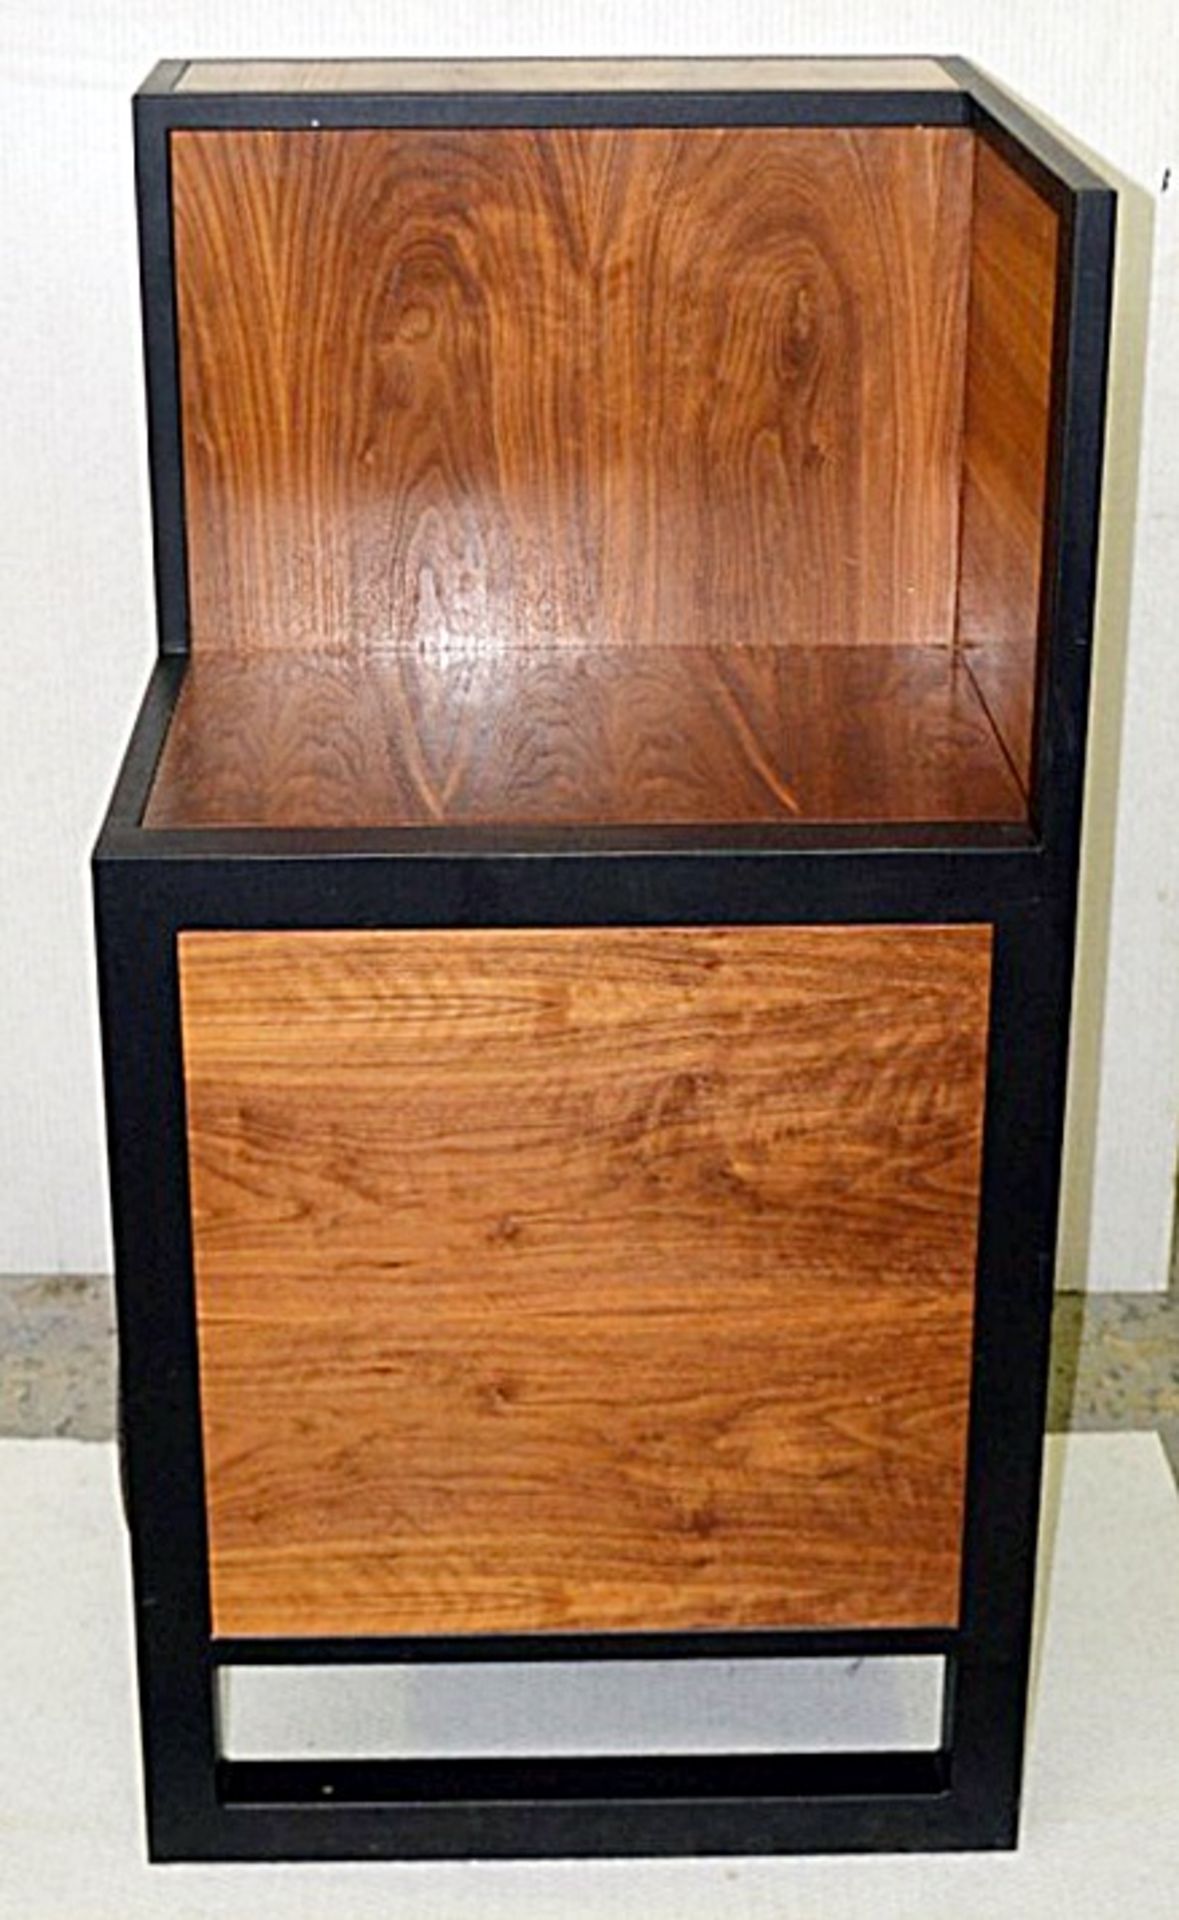 1 x Freestanding Display Unit Featuring Metal Cart Wheels And Wood Finish - Image 3 of 5